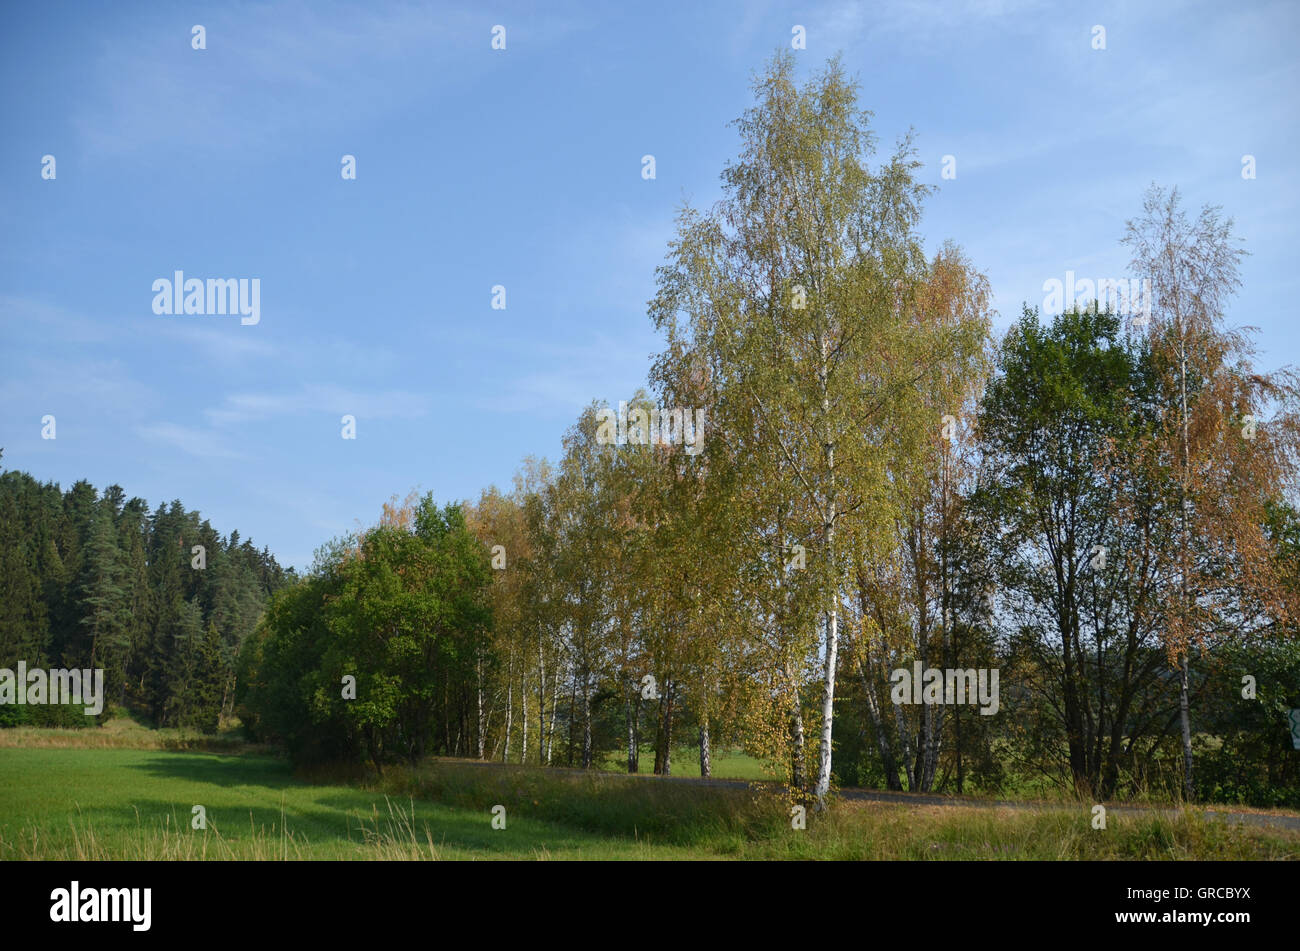 Landscape In Franconia, Fall Foliage In Midsummer Because Of Long Lasting Drought In Summer 2015 Stock Photo